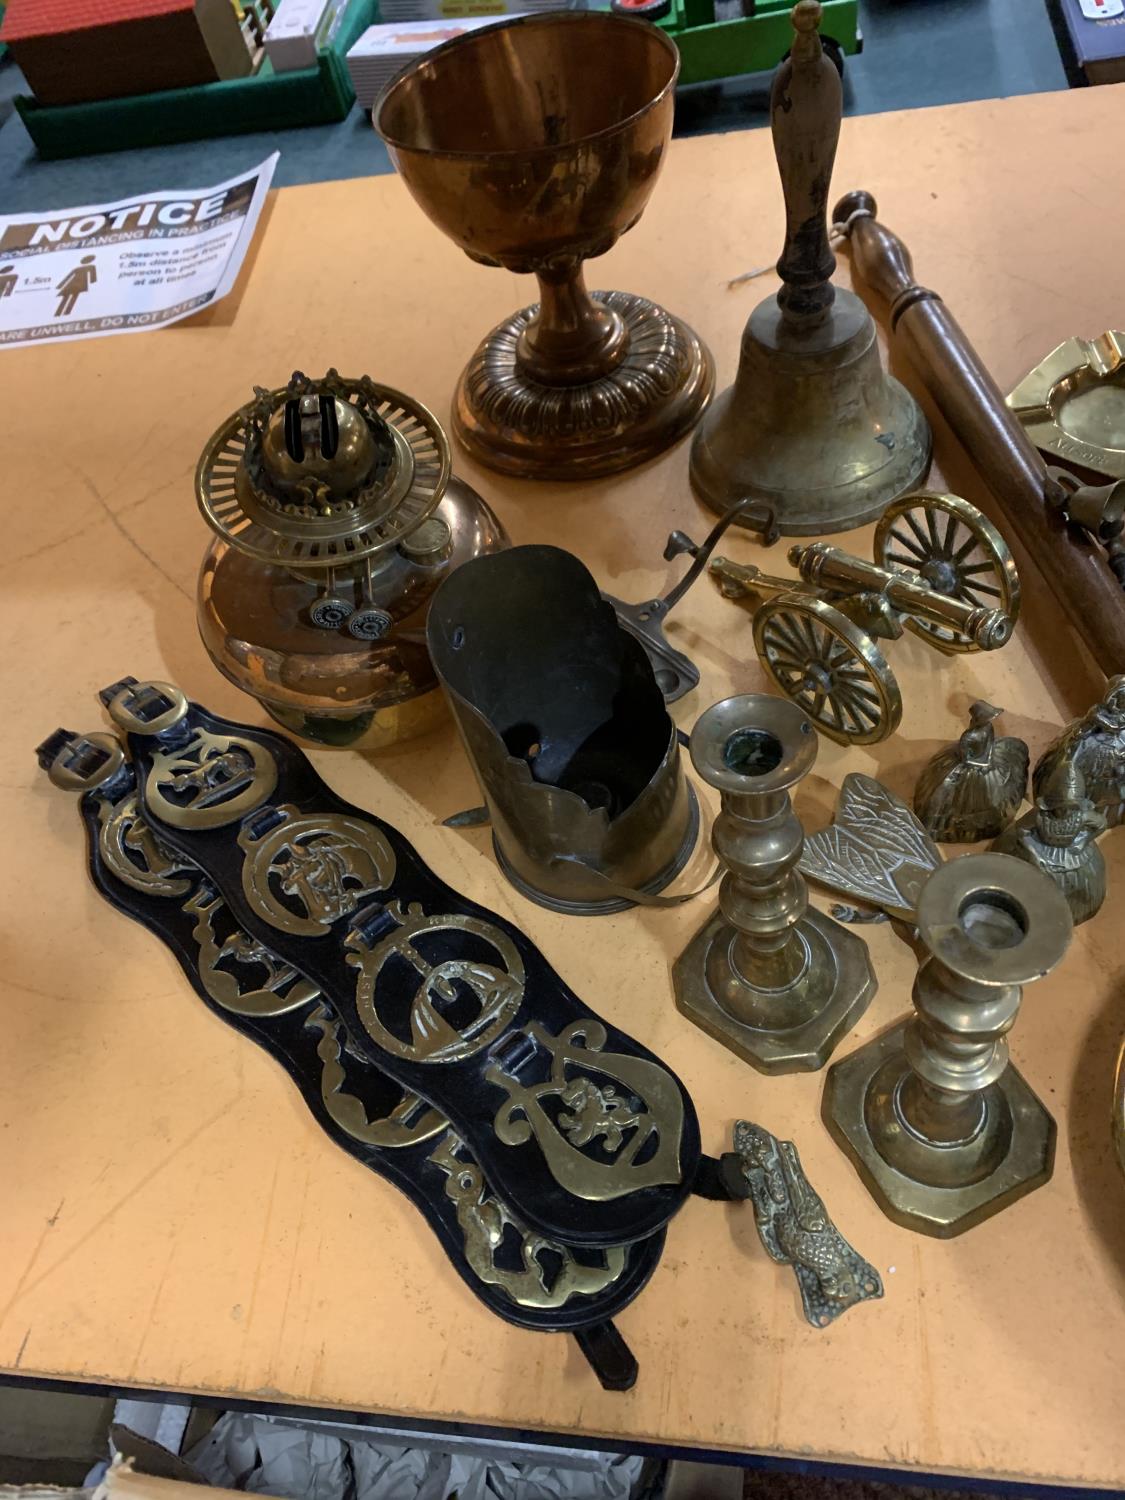 A LARGE QUANTITY OF BRASSWARE TO INCLUDE A BELL, HORSE BRASSES, KETTLE, CANDLESTICKS, CANNON, LAMP - Image 10 of 12